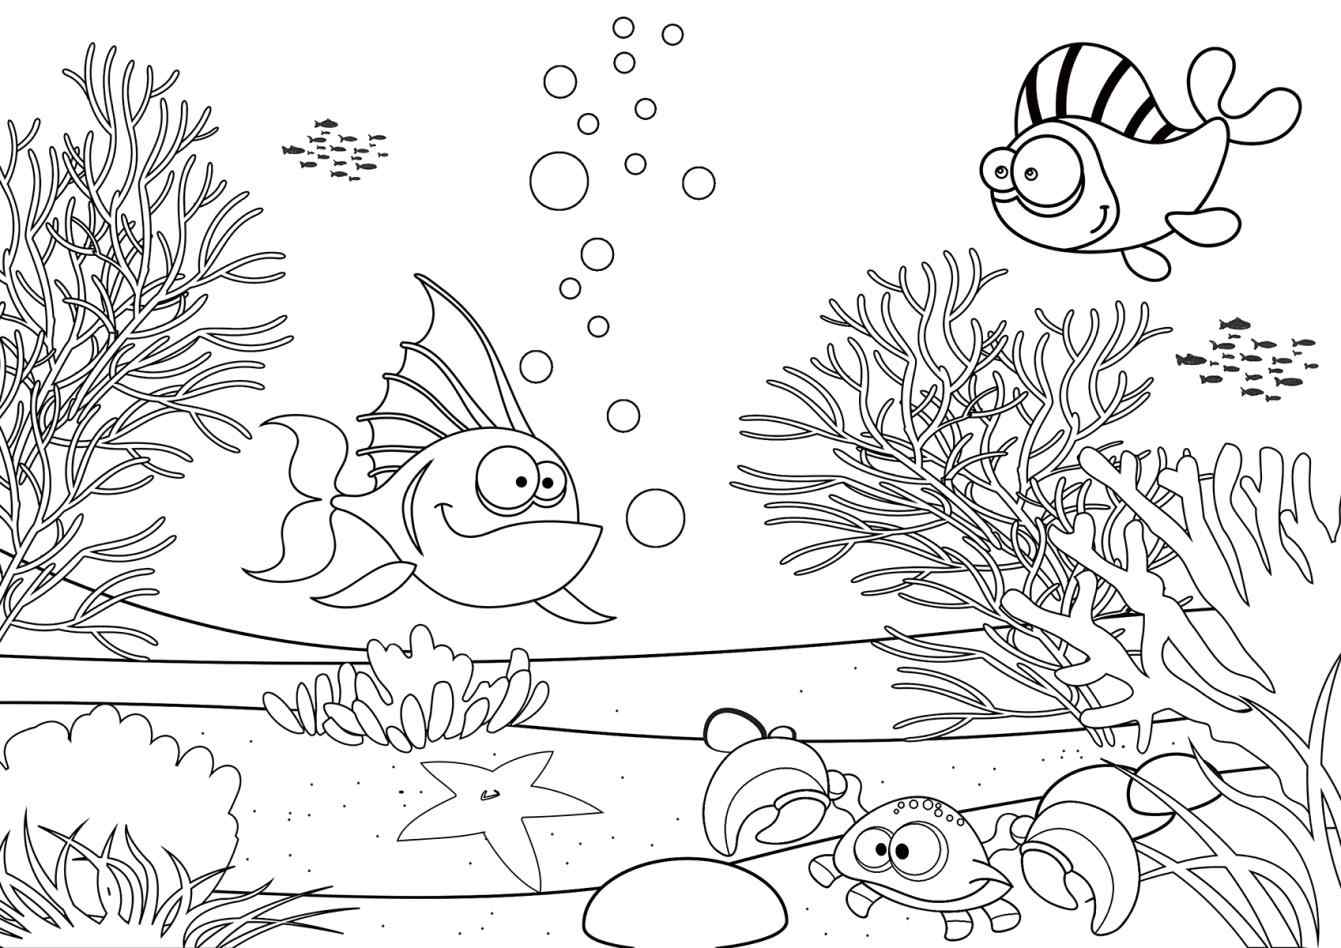 ecosystem-drawing-with-labels-at-getdrawings-free-download